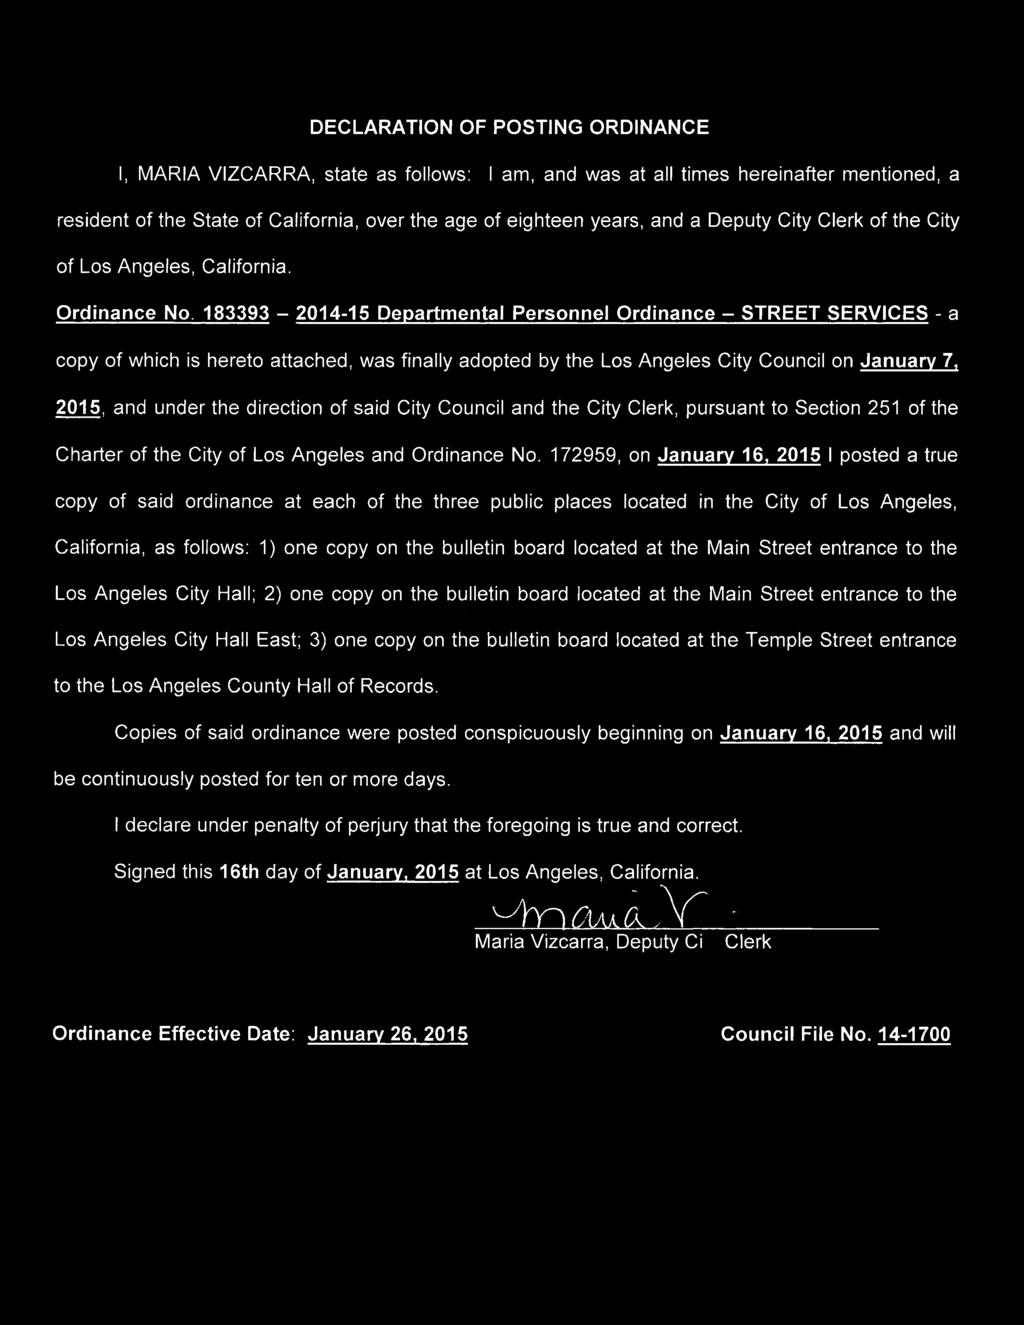 183393 2014-15 Departmental Personnel Ordinance STREET SERVICES - a copy of which is hereto attached, was finally adopted by the Los Angeles City Council on January 7, 2015, and under the direction